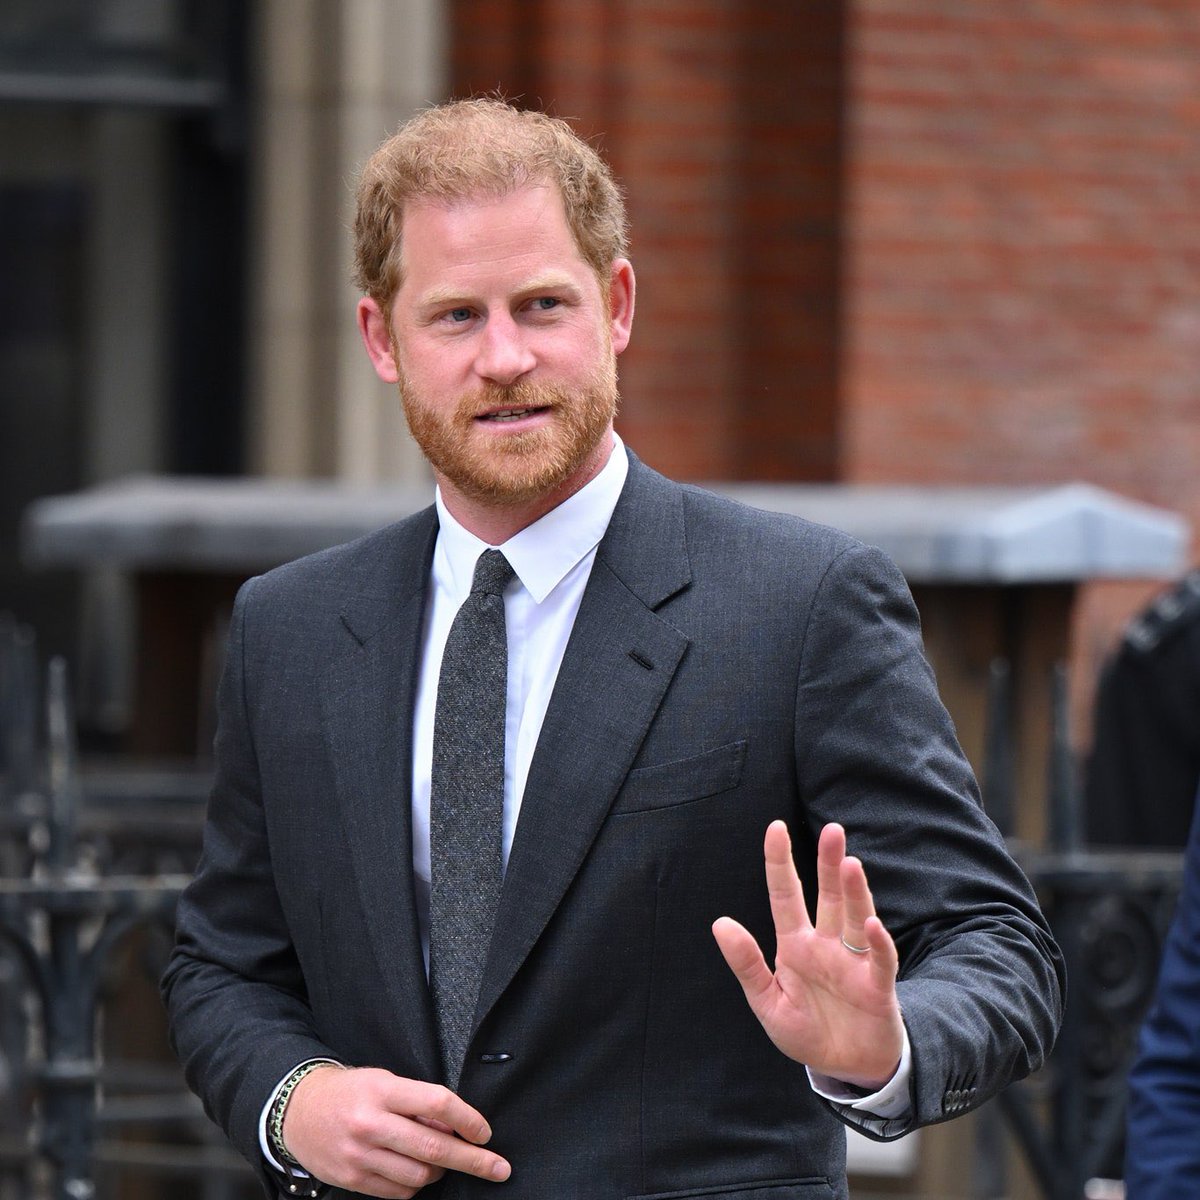 Thank you for fighting the good fight Harry!
You are a Prince among men!
Diana would be so very proud!
We are! 
#IStandWithPrinceHarry #PrinceHarryIsAHero #PrinceHarryIsRight #PiersIsToxic #phonehackingtrial